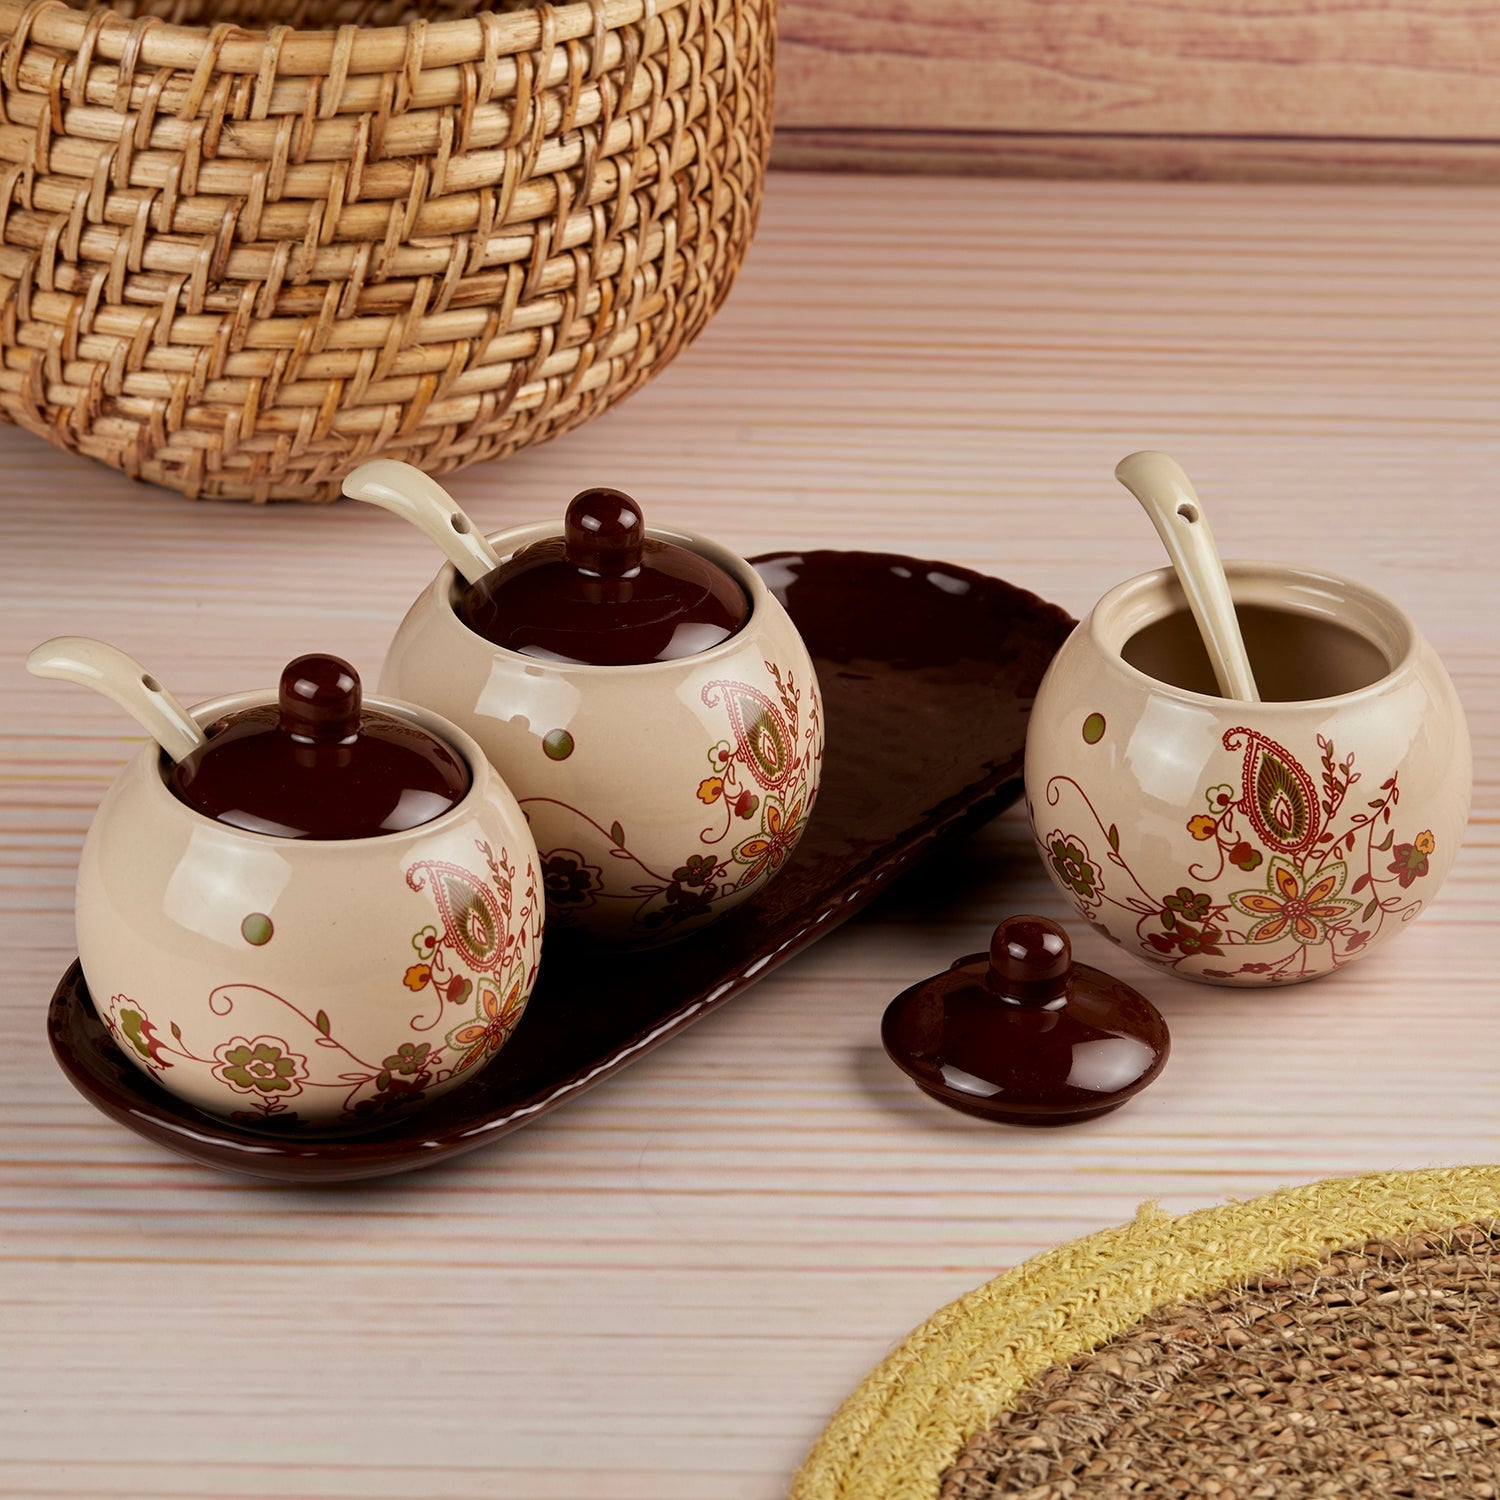 Ceramic Condiment Jars and Containers Set of 3 with Tray and Spoon for Kitchen (10679)